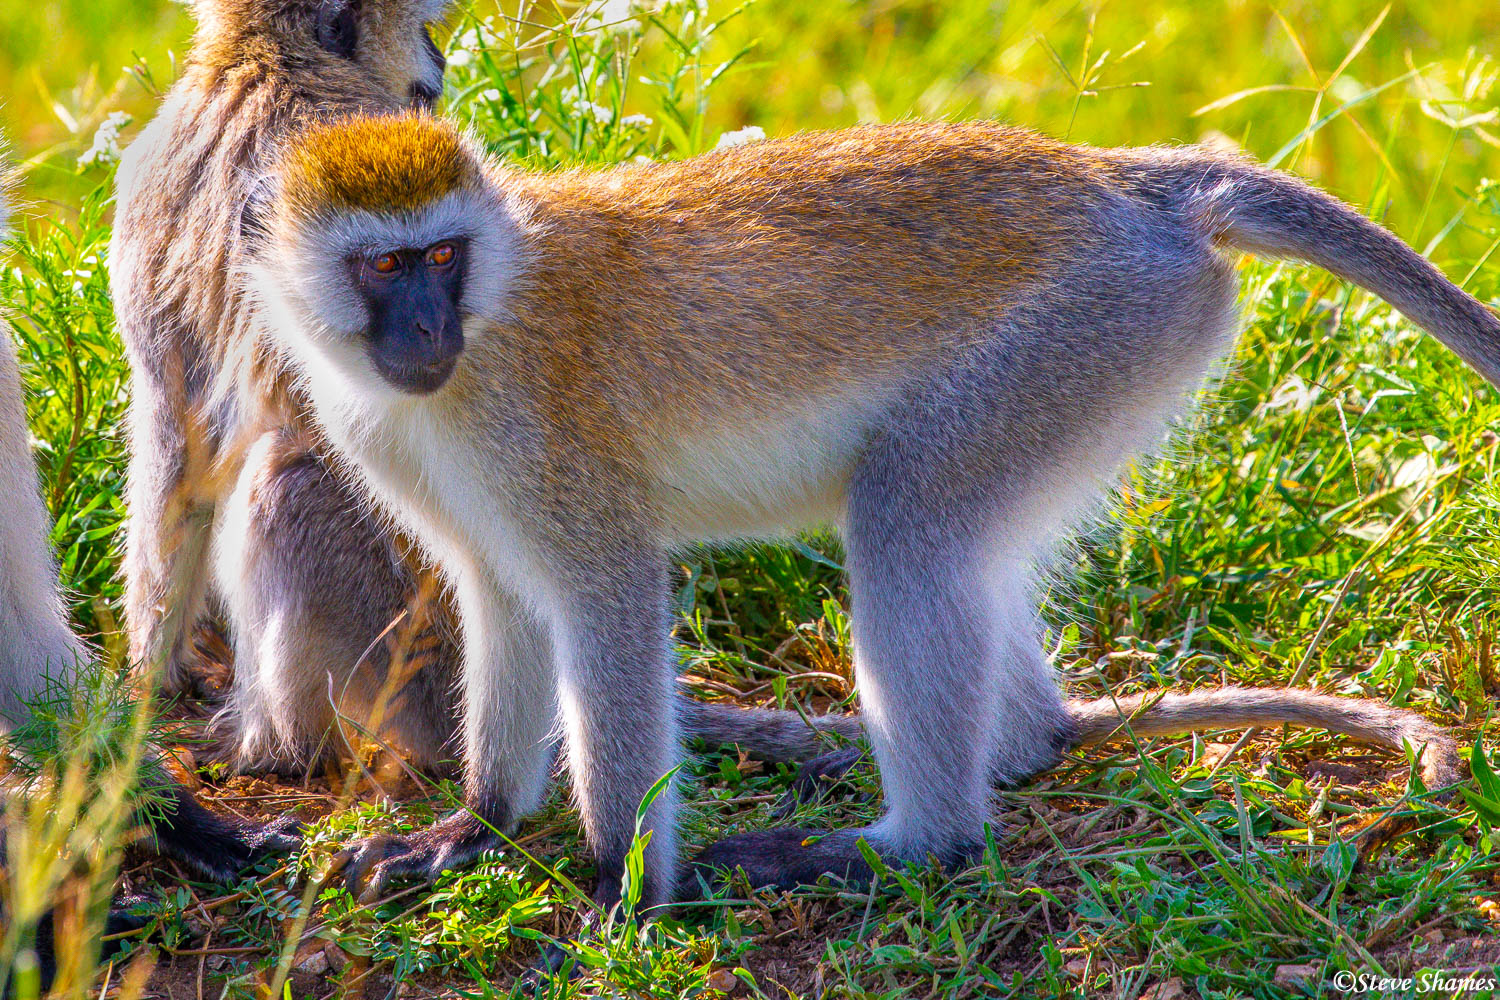 Other than the baboon, one of the most common monkeys in Africa -- the vervet monkey.